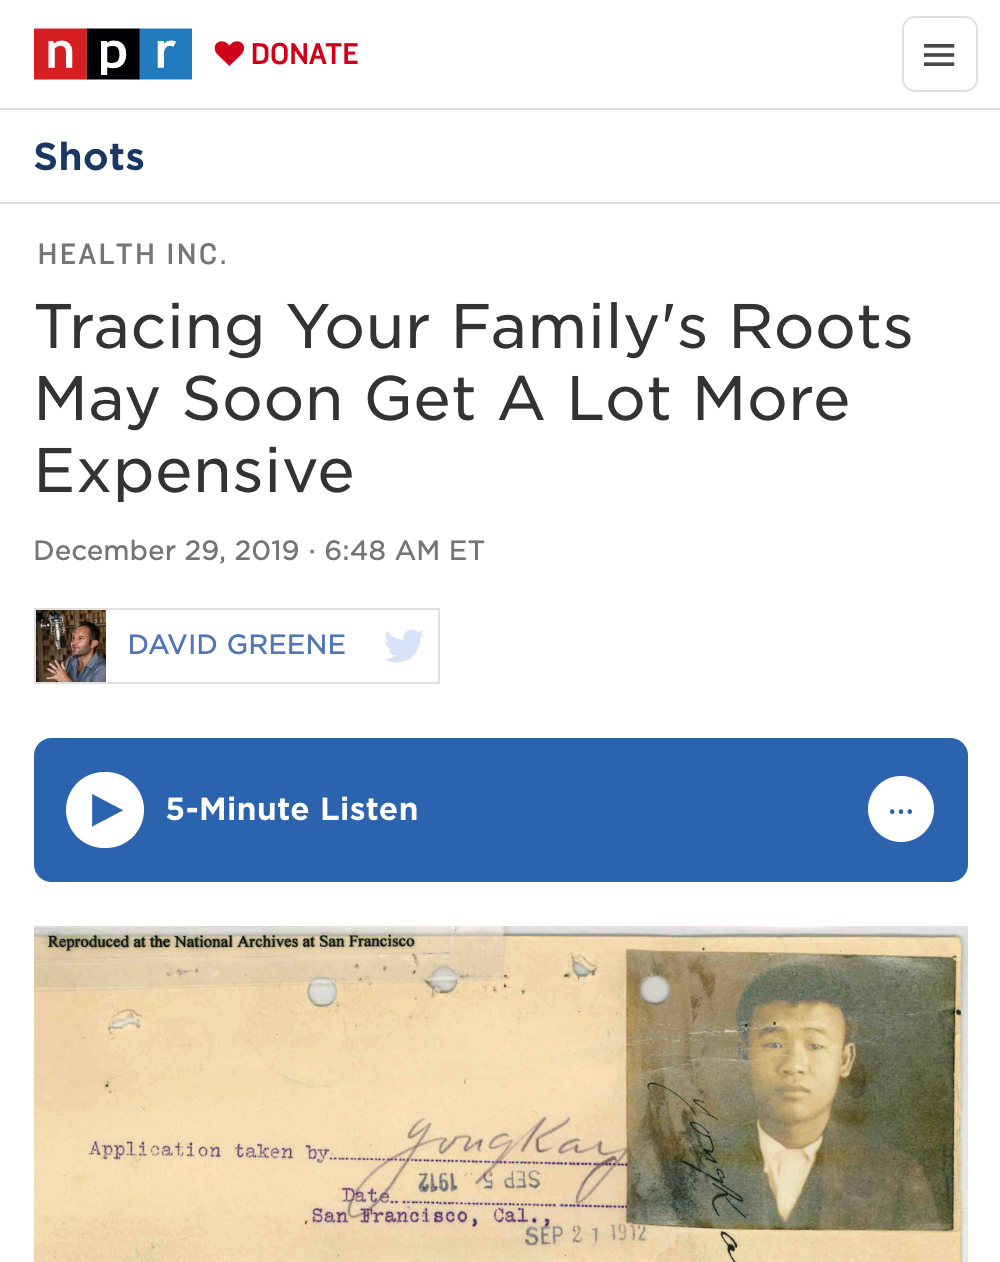 Tracing Your Family's Roots May Soon Get A Lot More Expensive